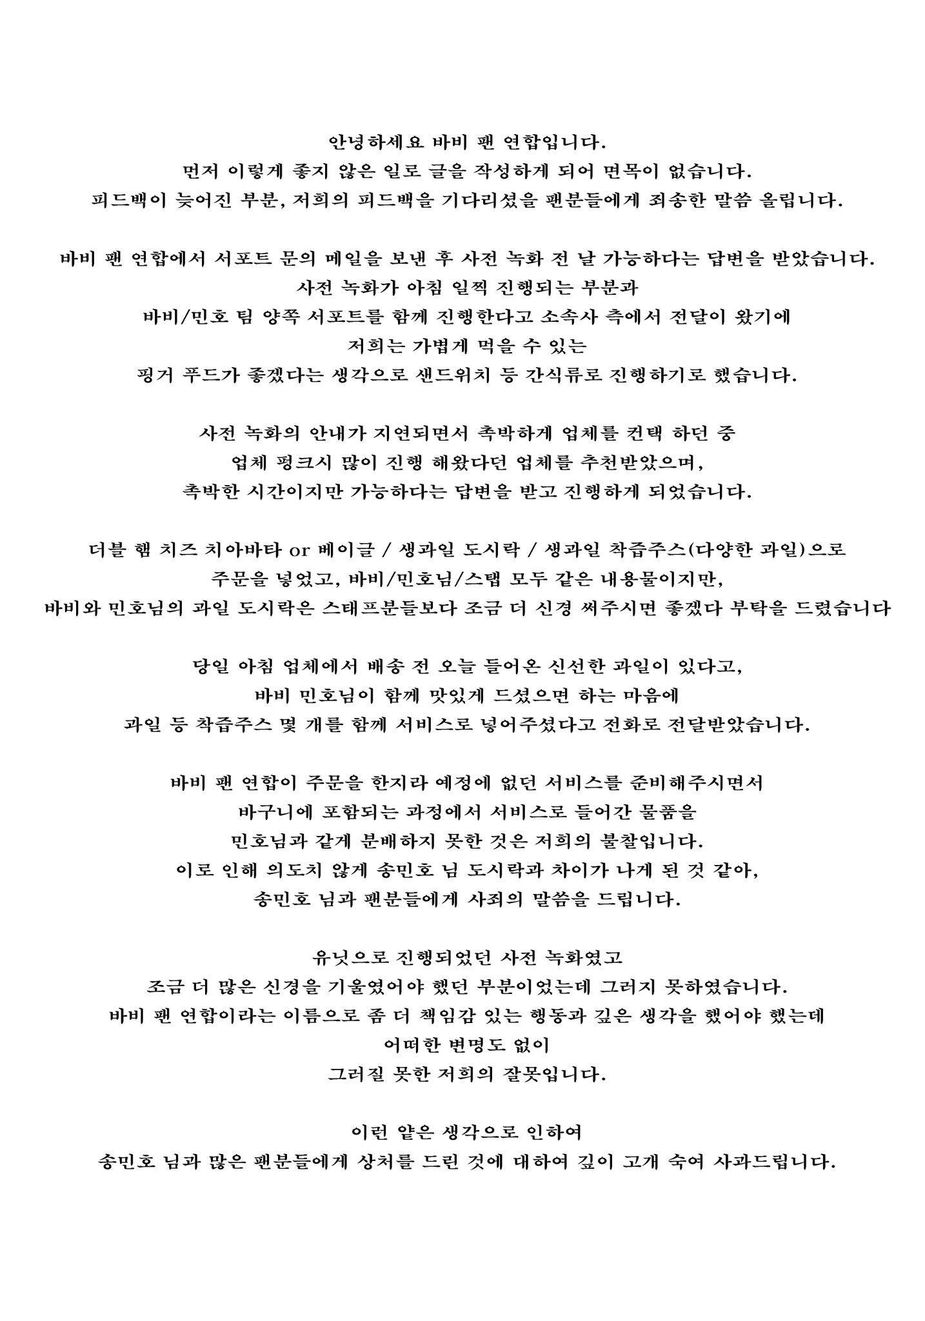 Official apology from Bobby Fan Union. / Twitter